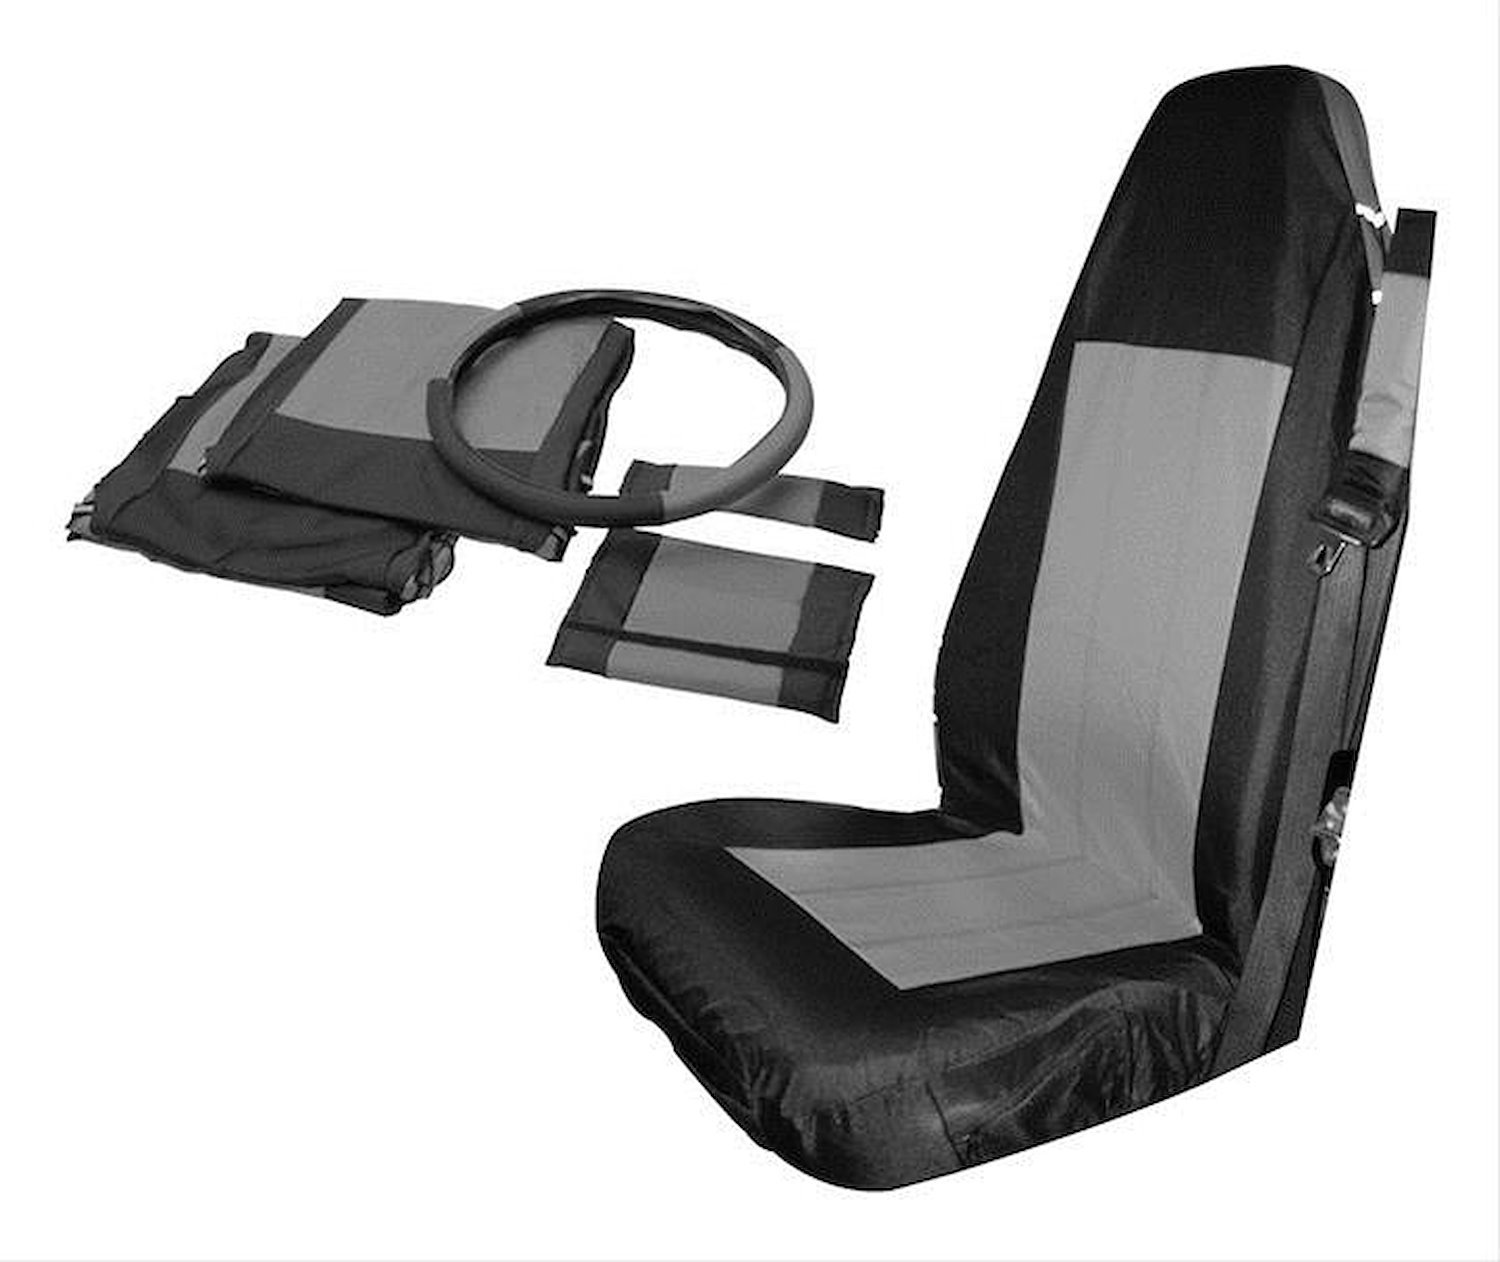 SCP20021 Front Black/Gray Seat Cover, Steering Wheel Covers, Seat Belt Pads for Jeep 2003-2006 TJ Wrangler